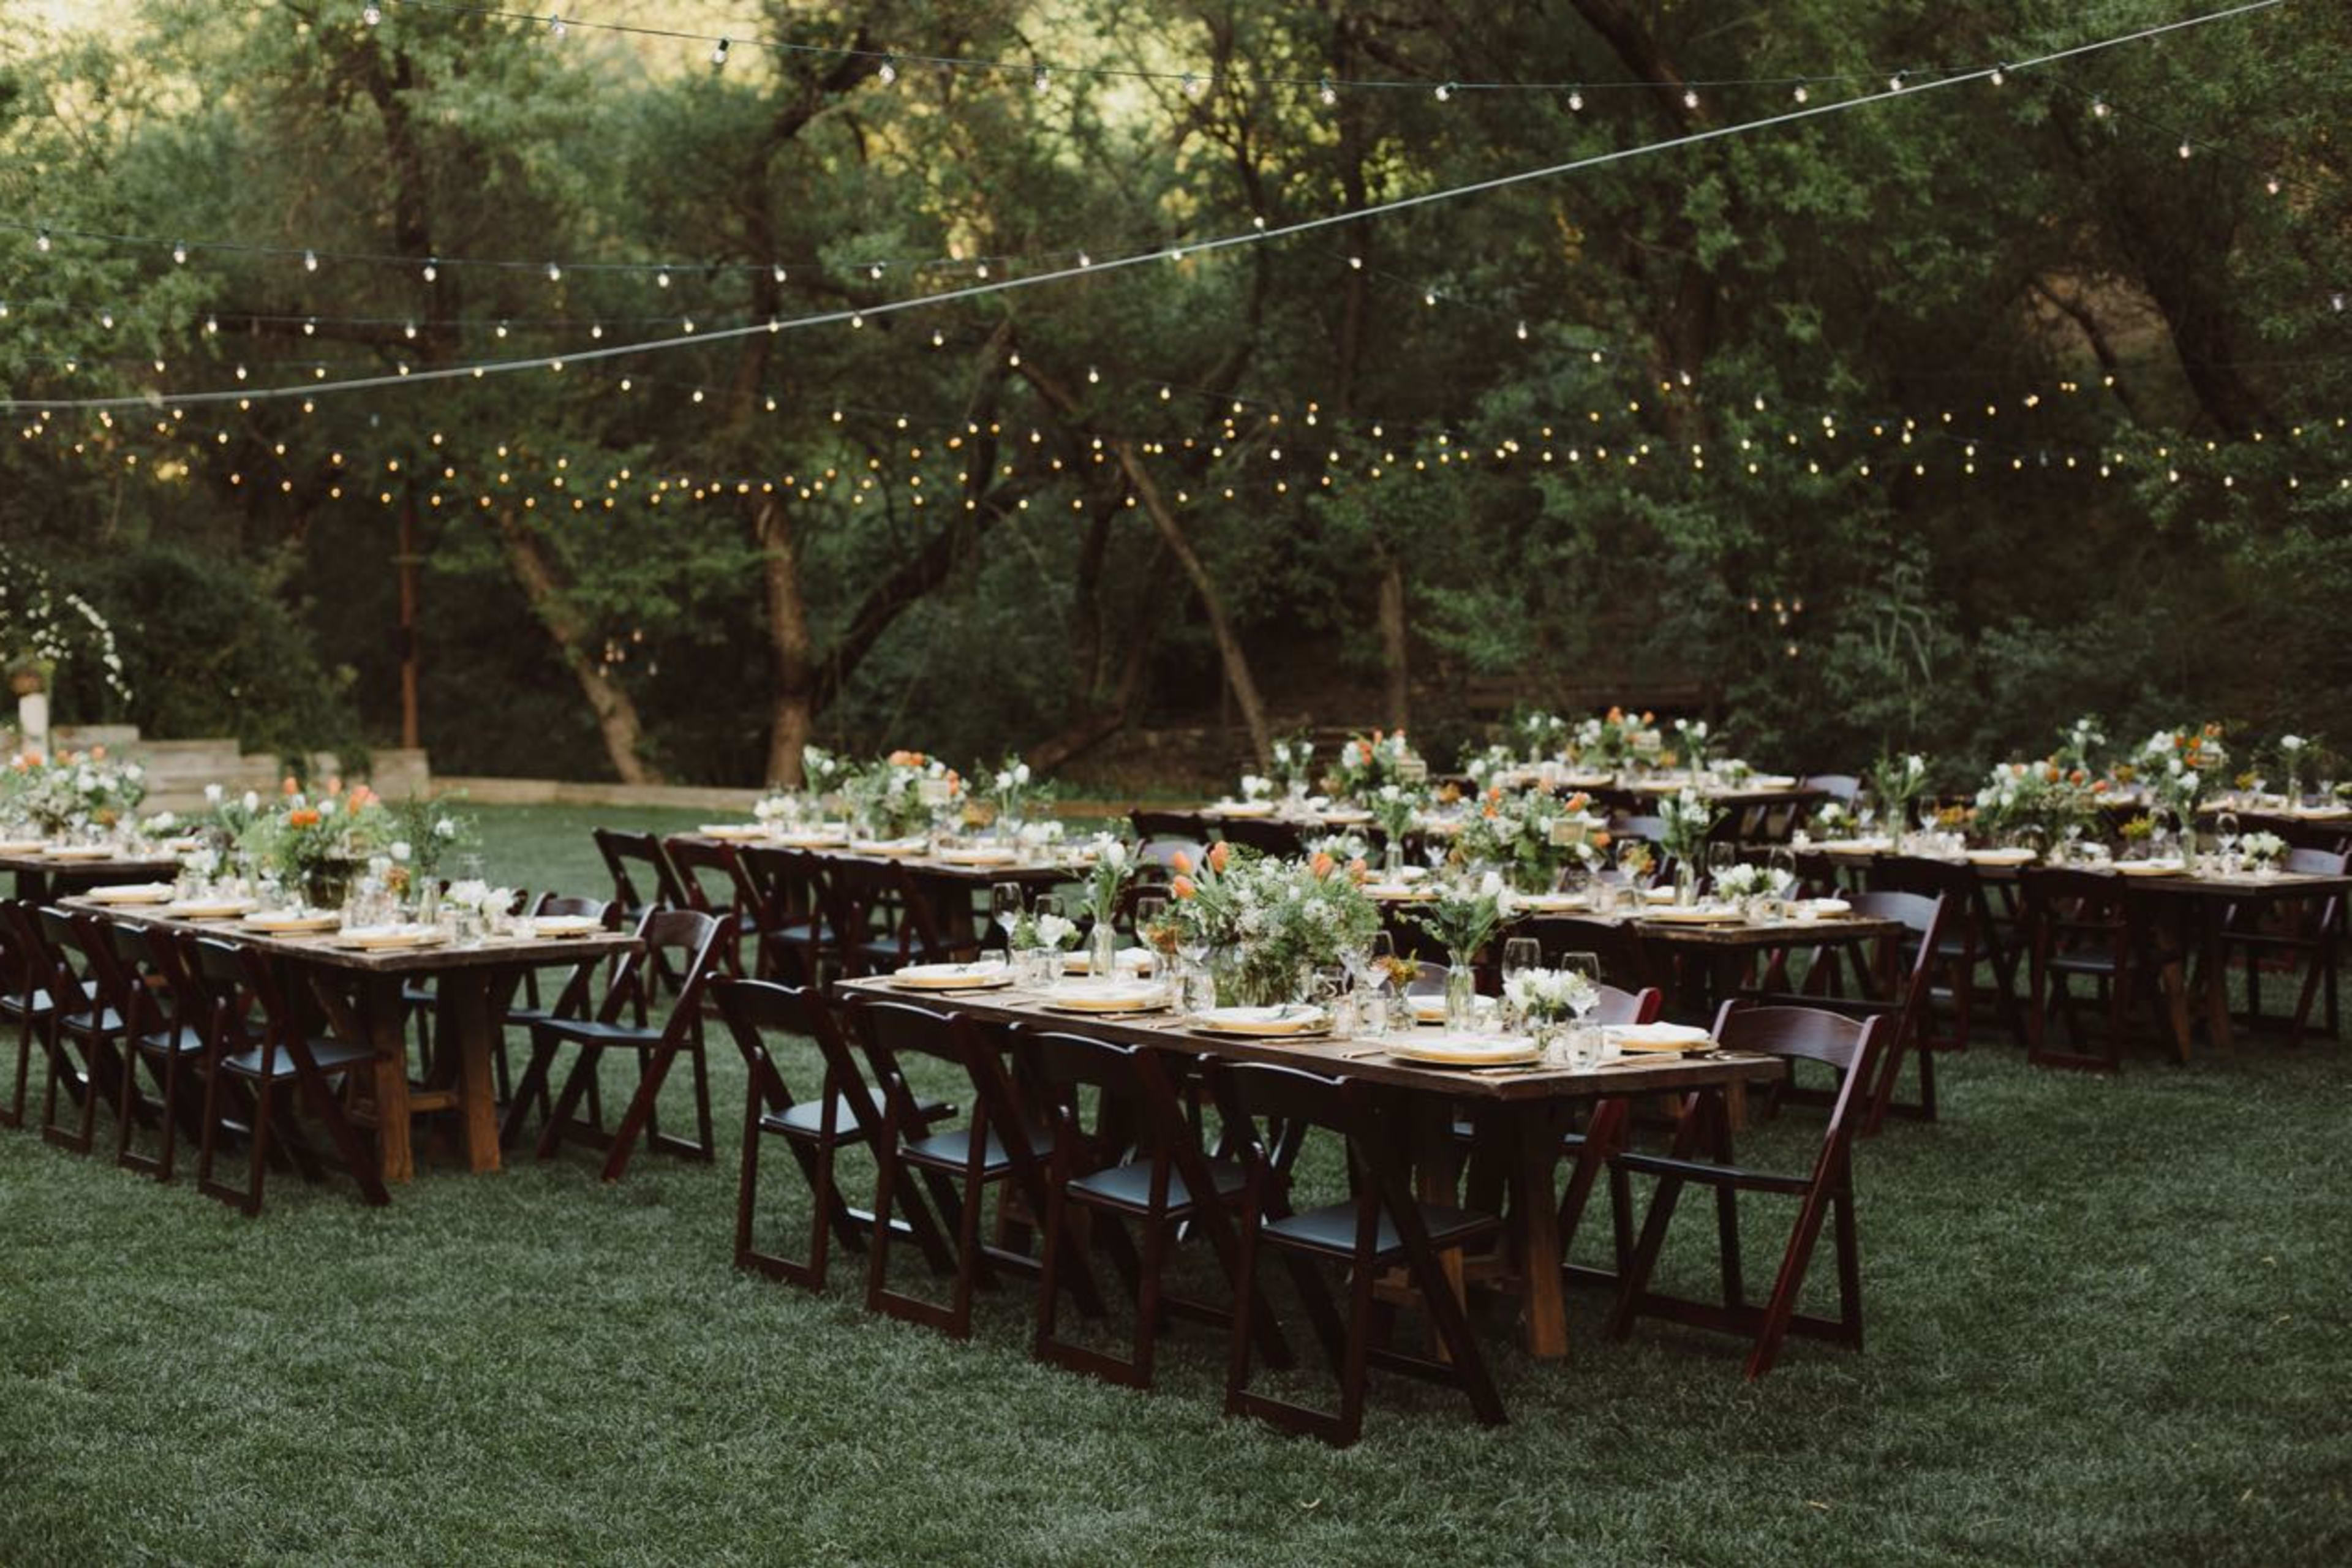 10 Best Wedding Venues For Rent in New York, NY